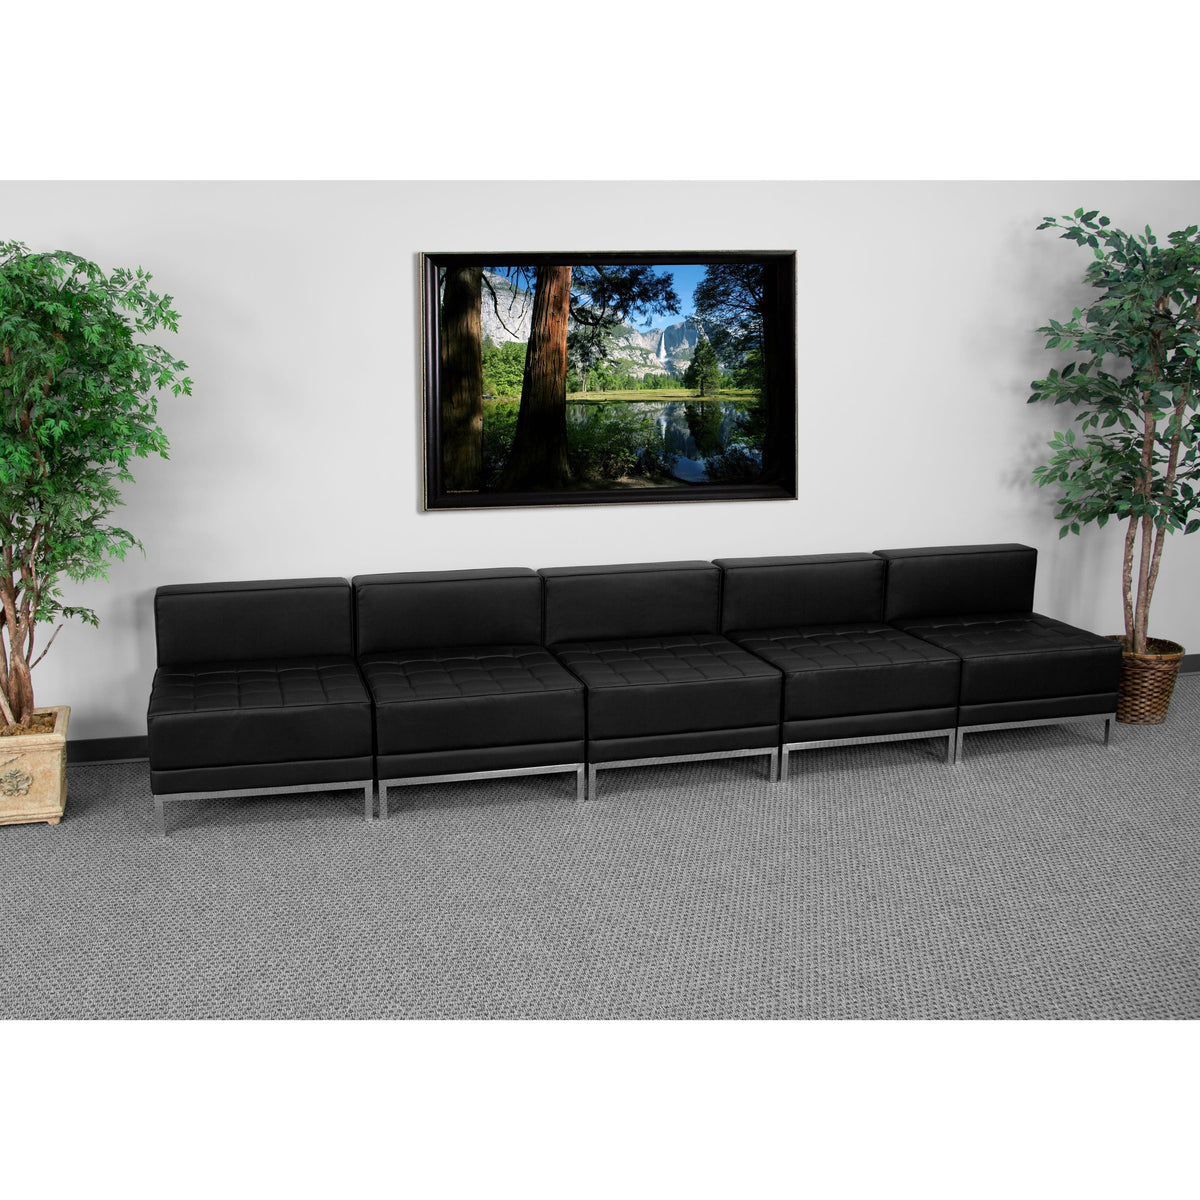 Black |#| 5 Piece Black LeatherSoft Modular Lounge Set with Taut Back and Seat